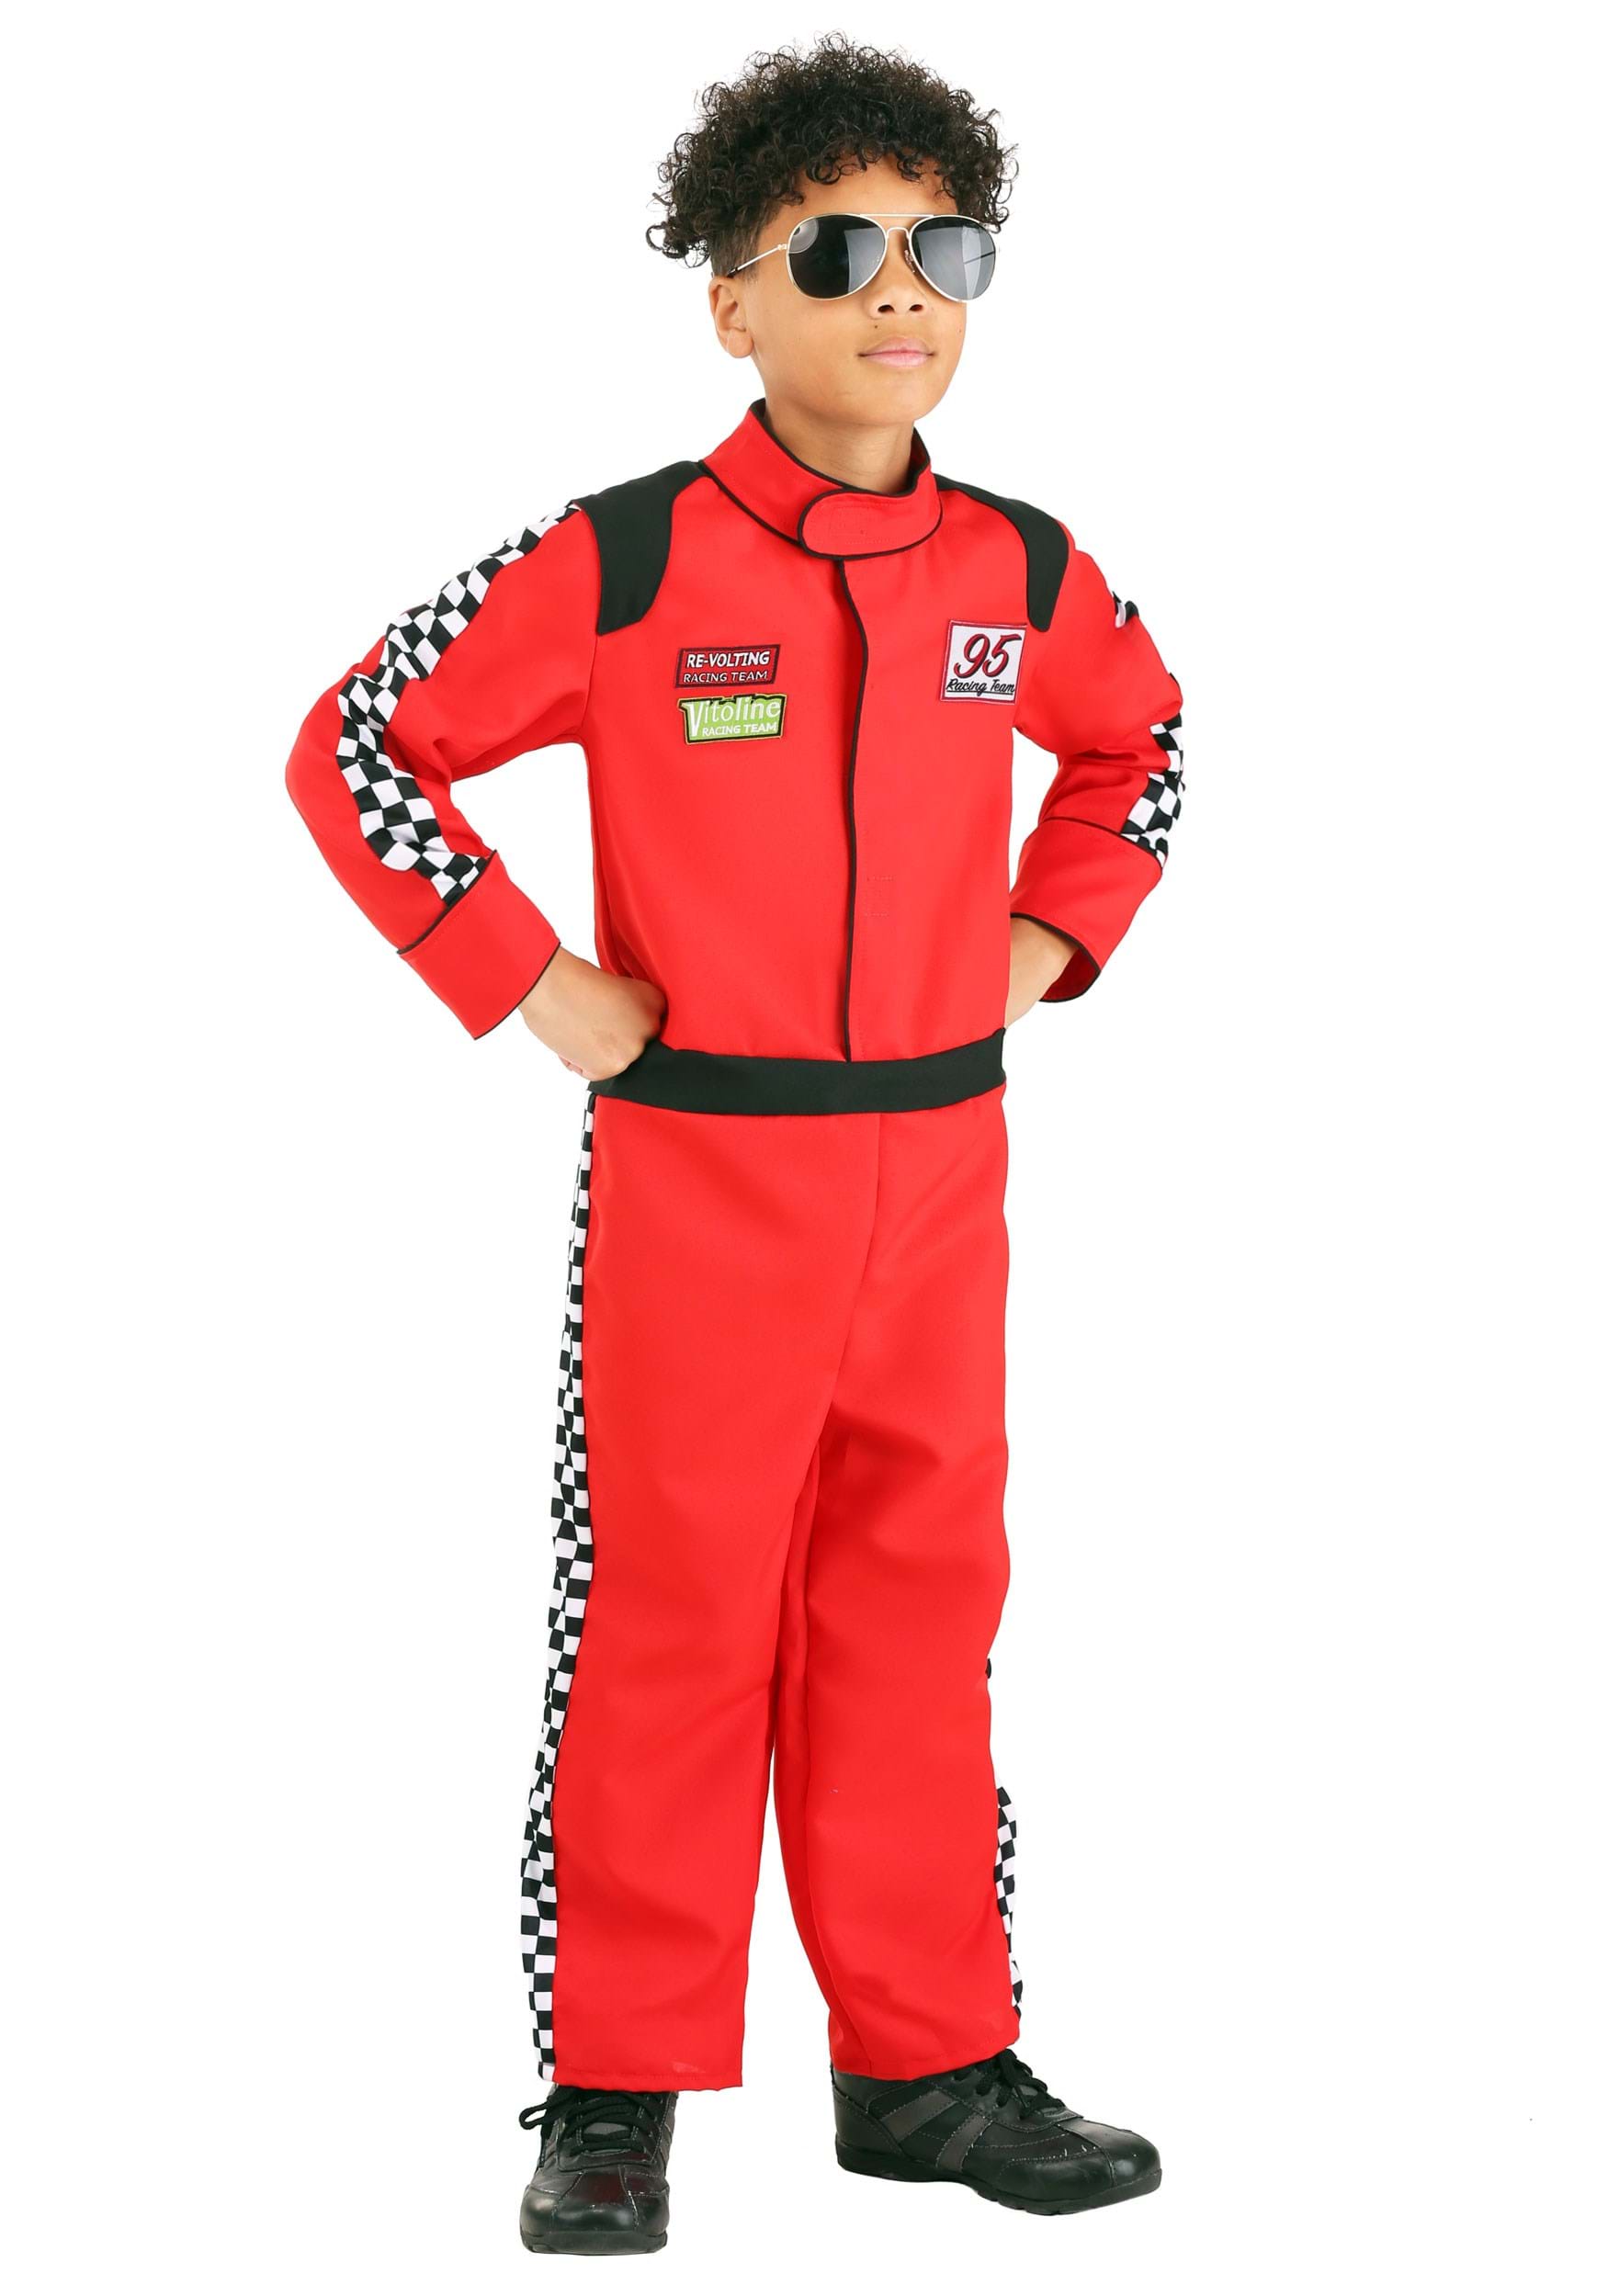 Photos - Fancy Dress RACER FUN Costumes Red  Jumpsuit Kid's Costume Black/Red/White FUN1 